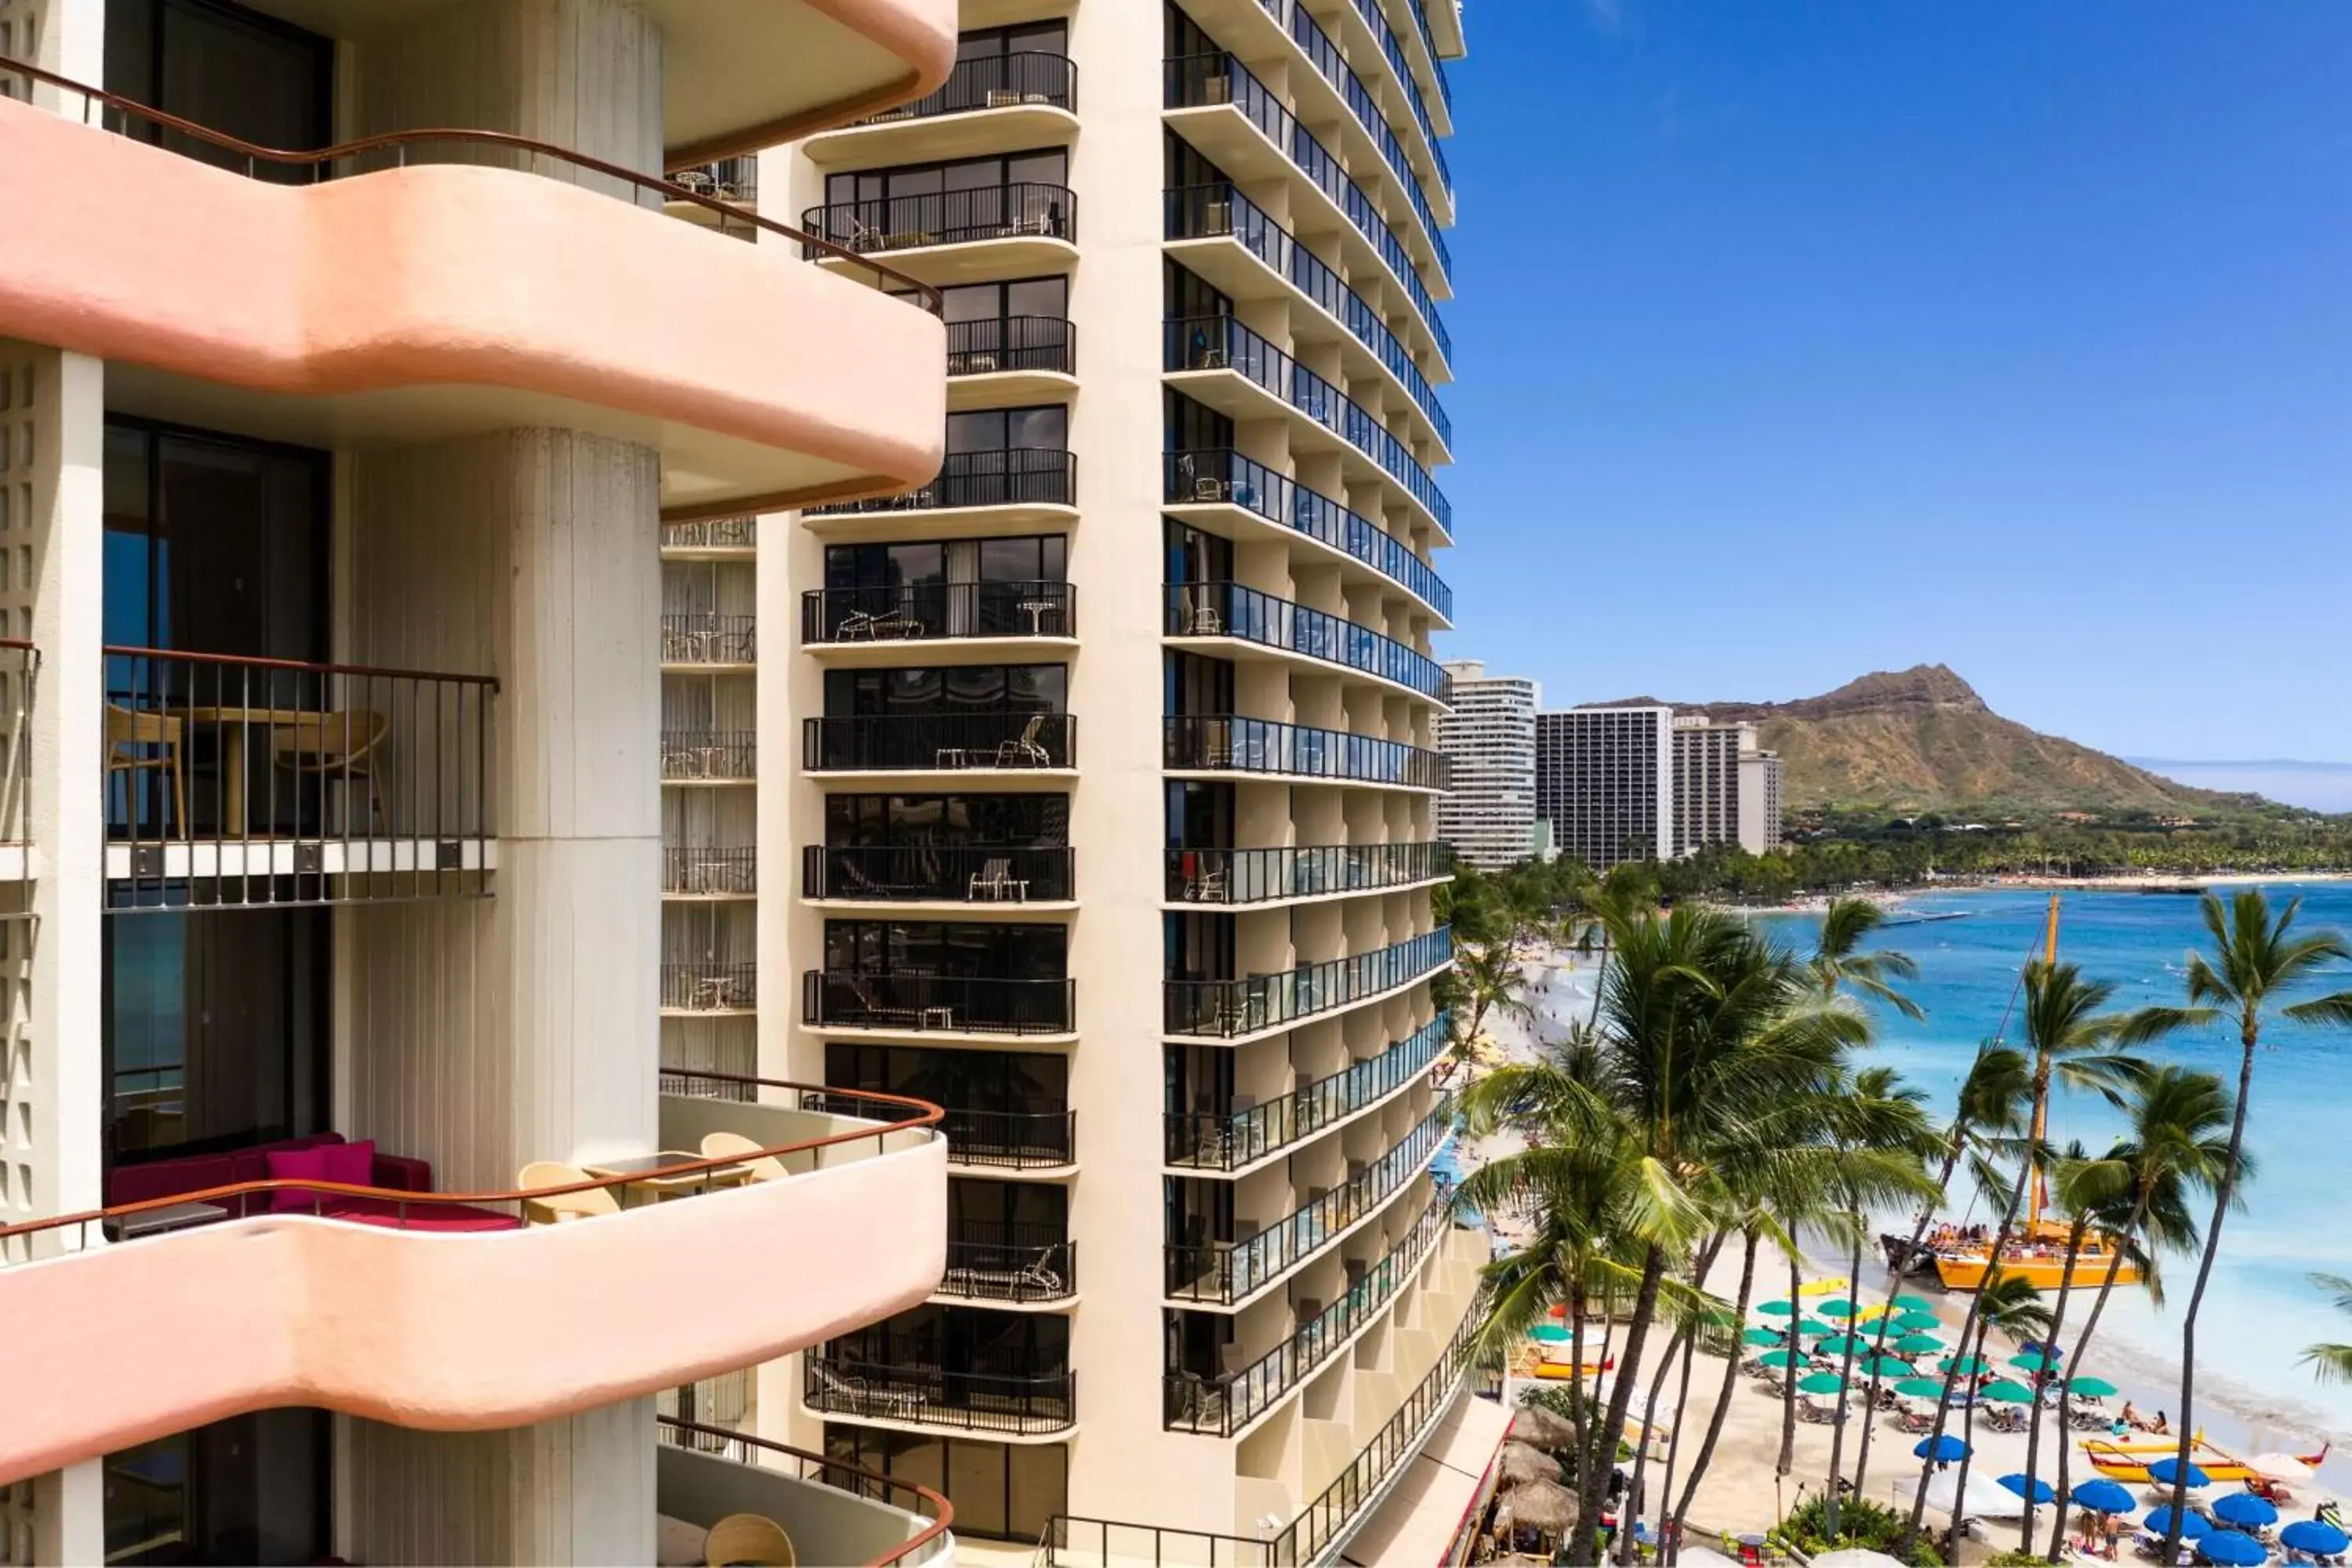 Property building, Pool View in The Royal Hawaiian, A Luxury Collection Resort, Waikiki